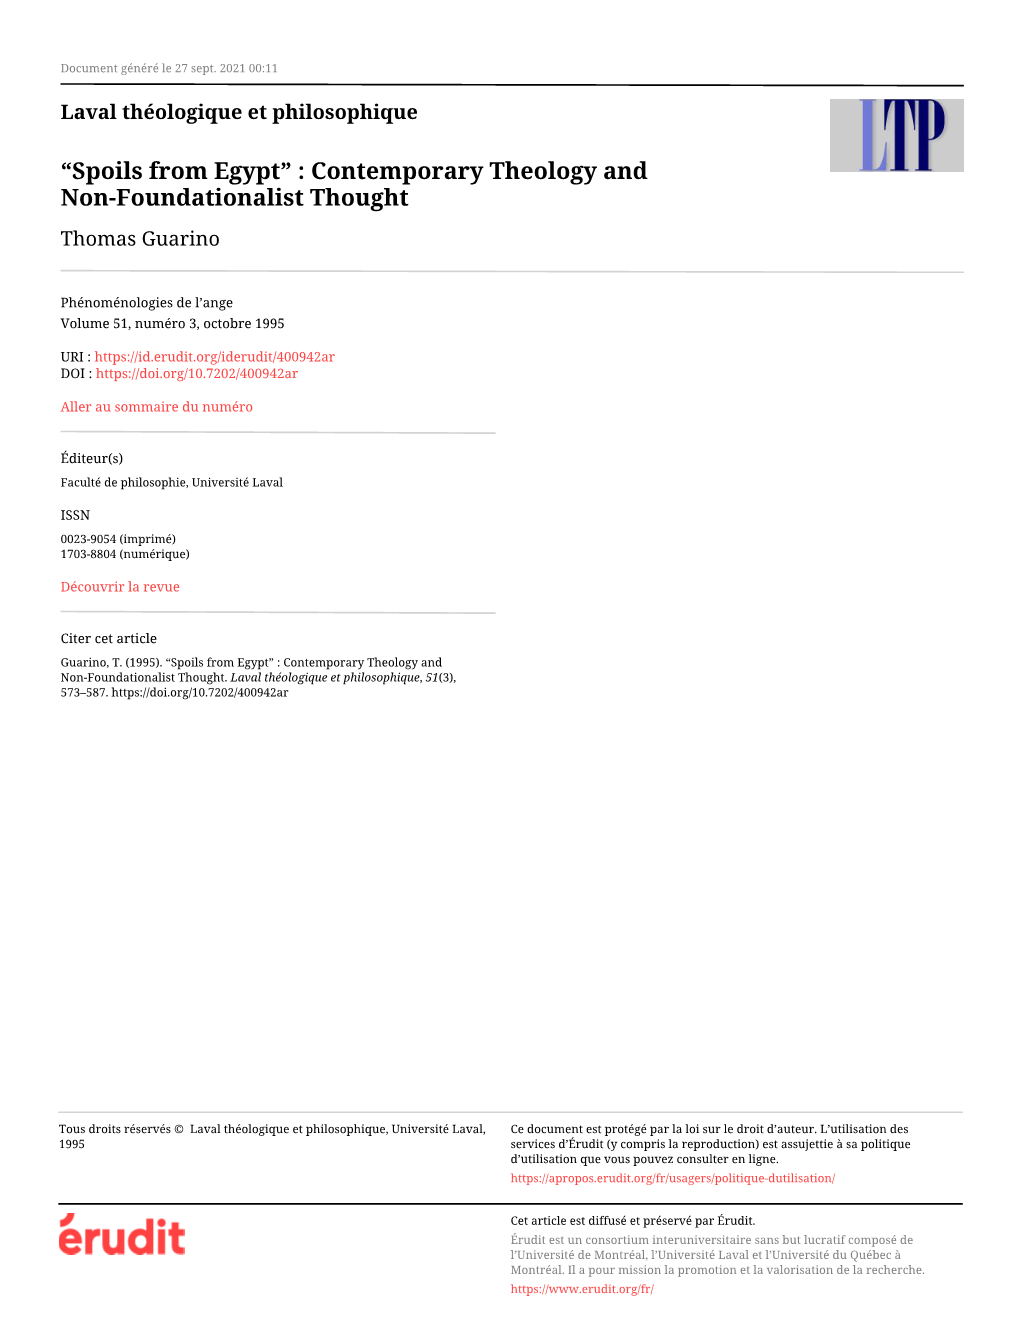 Spoils from Egypt” : Contemporary Theology and Non-Foundationalist Thought Thomas Guarino